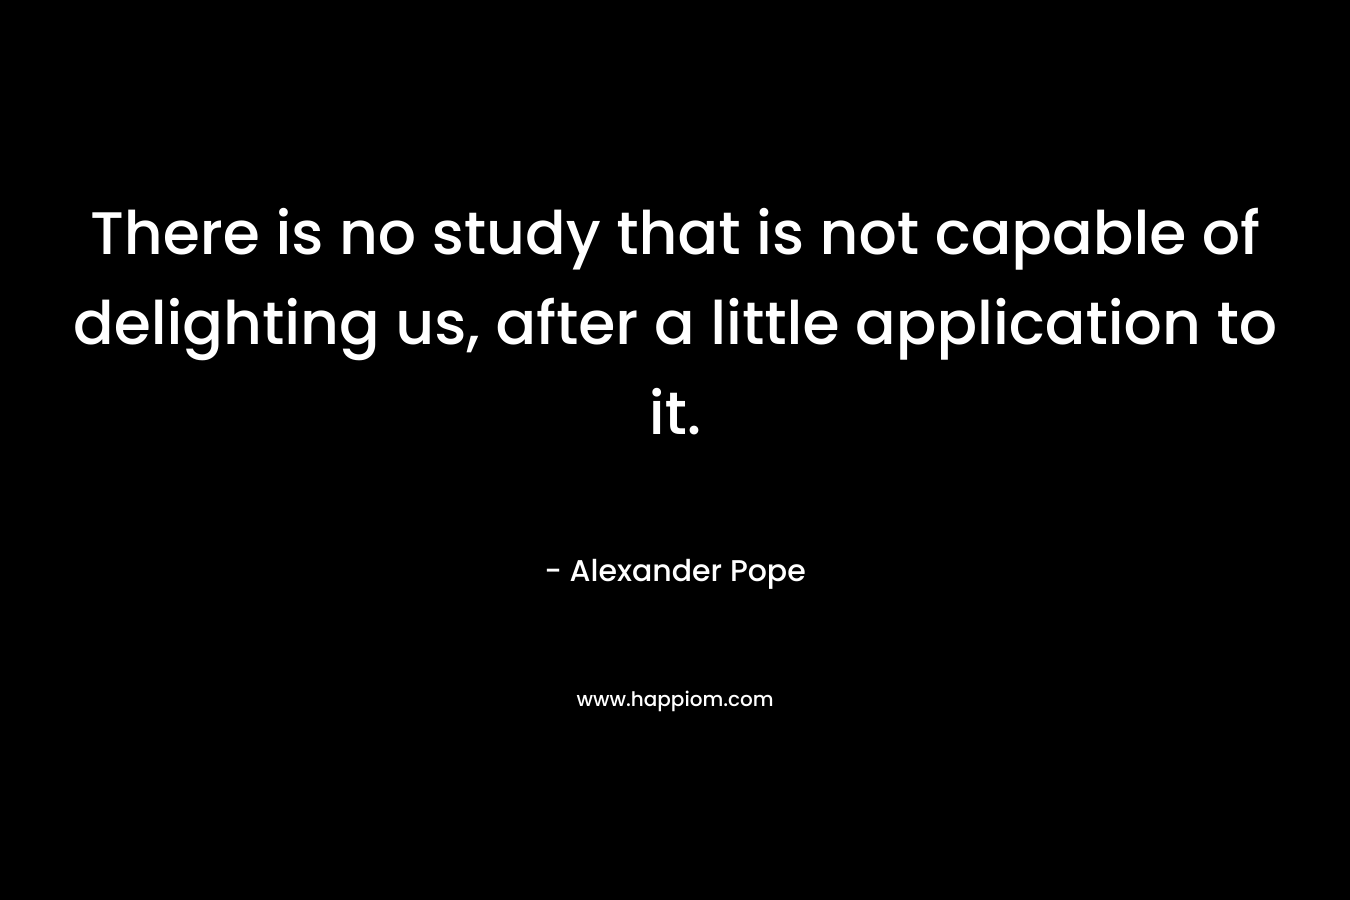 There is no study that is not capable of delighting us, after a little application to it. – Alexander Pope